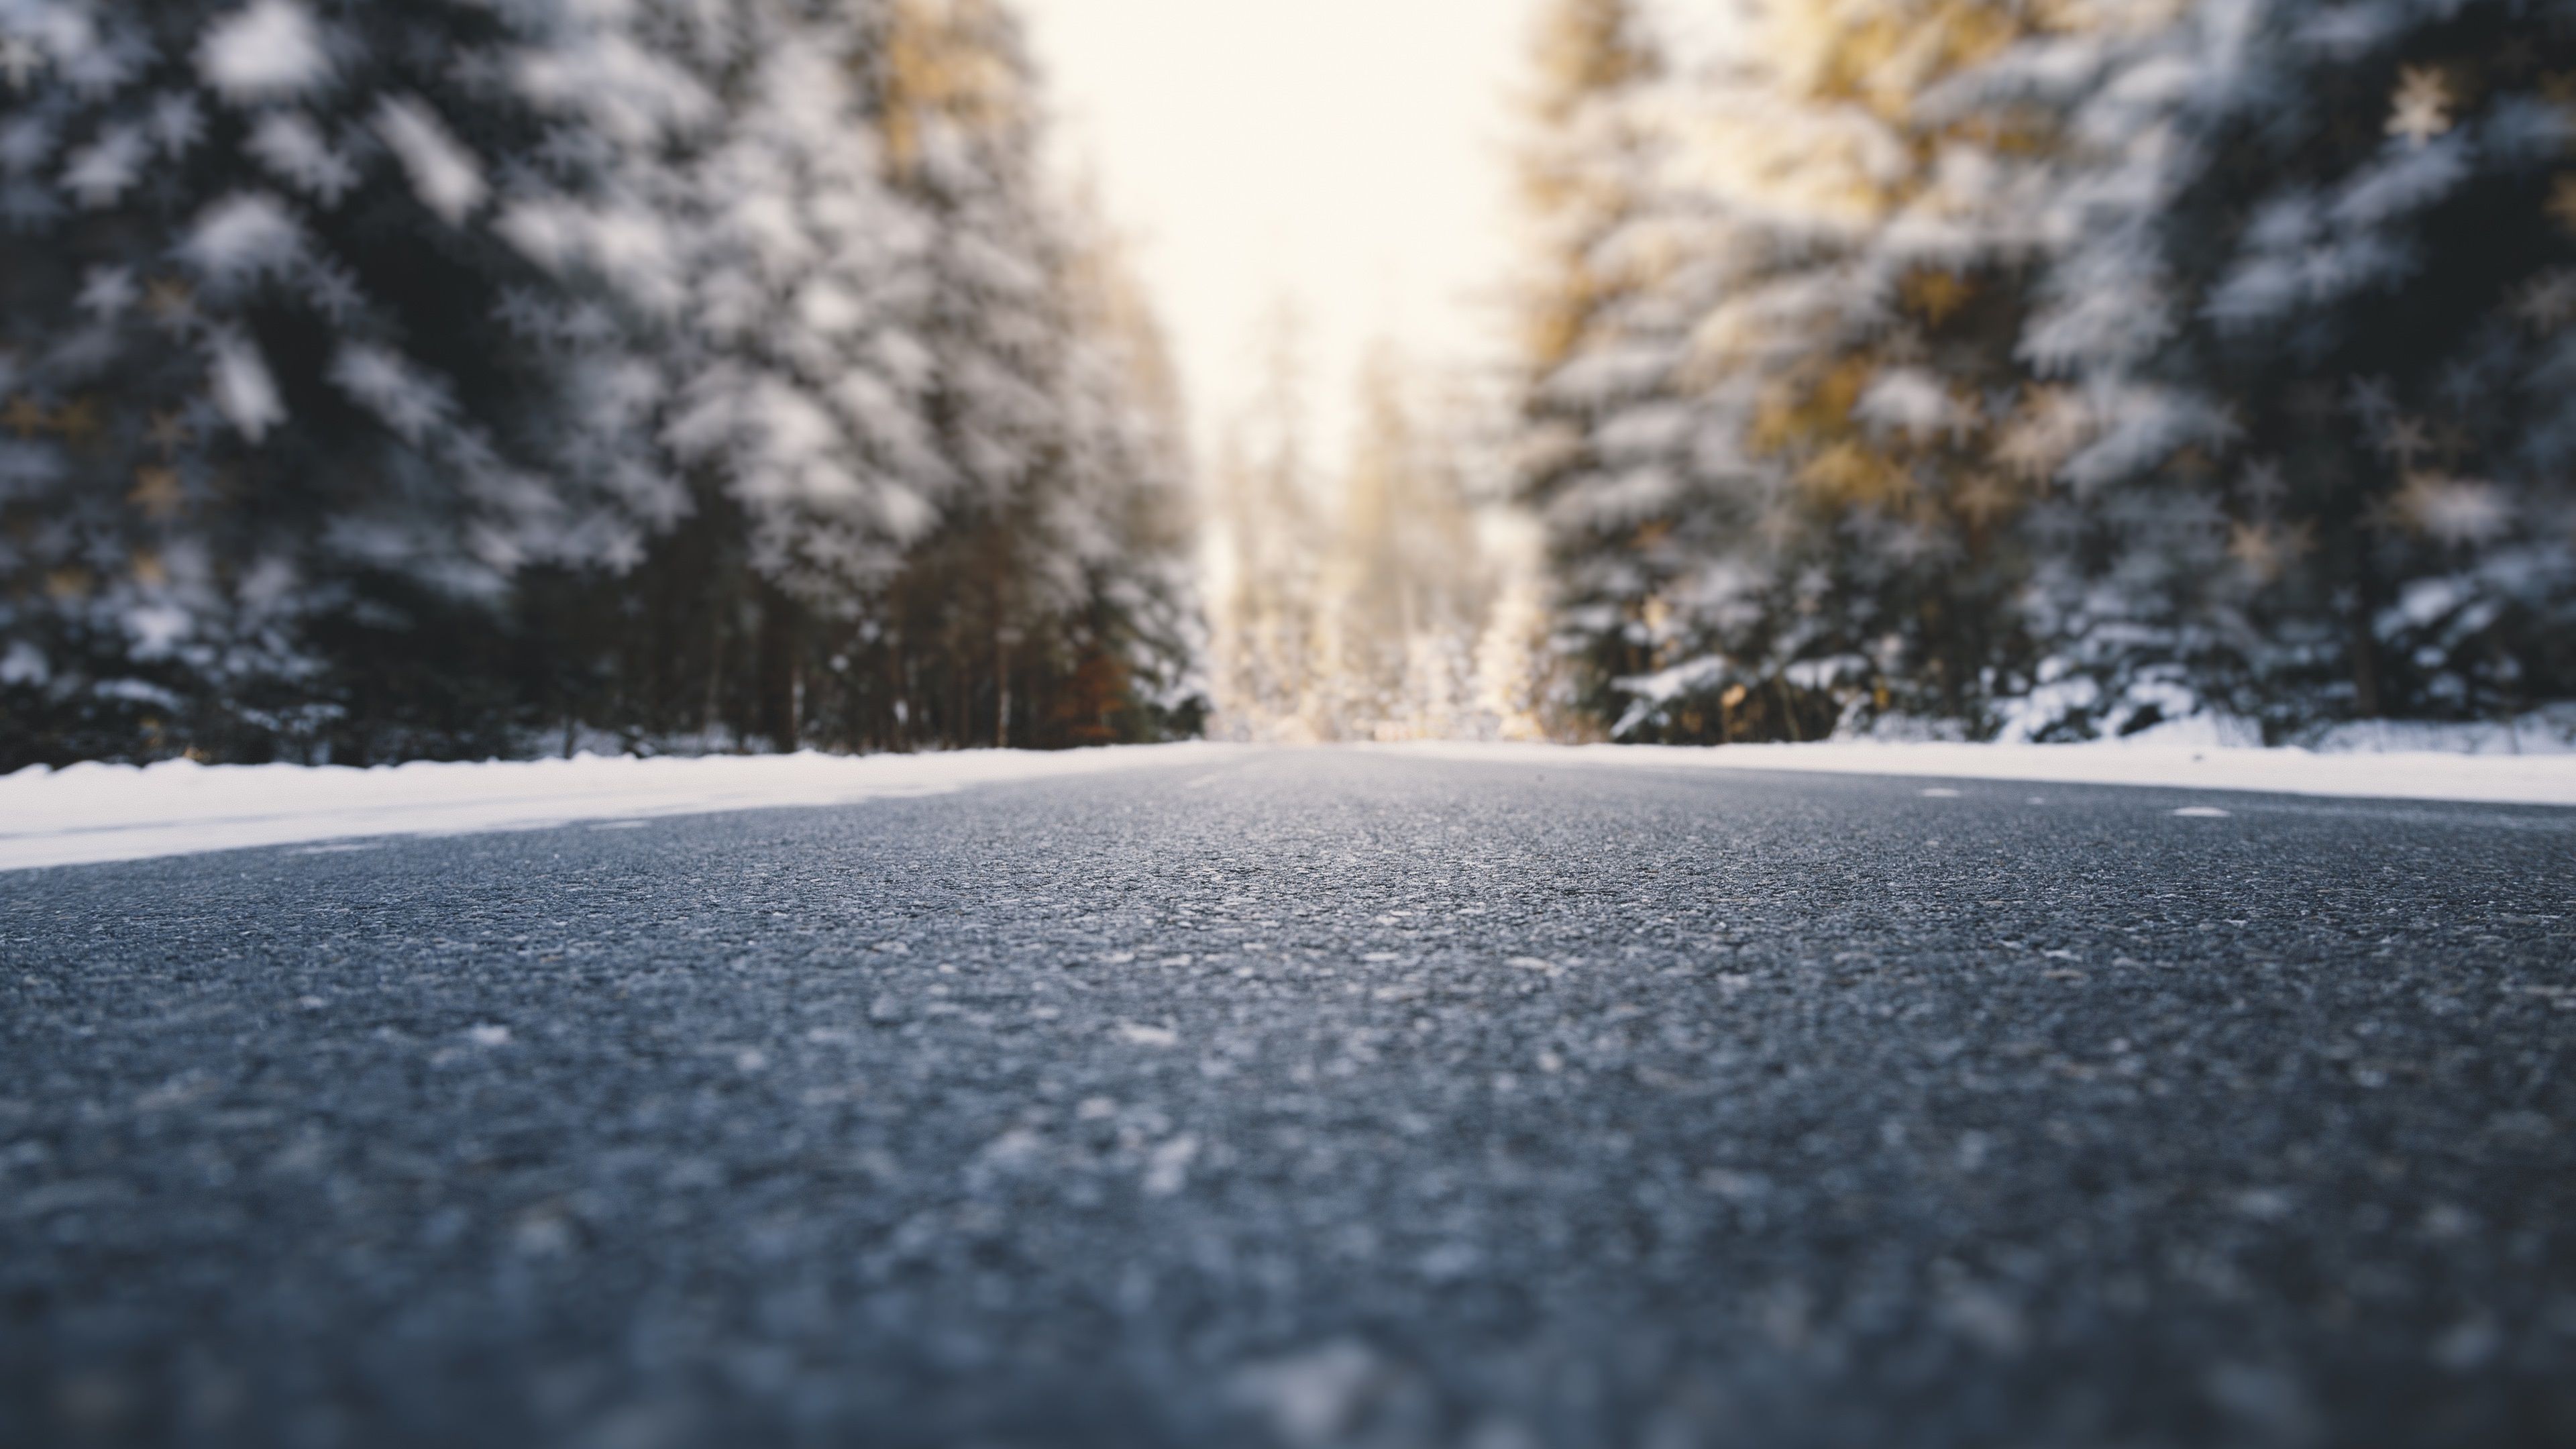 Wallpaper Road, ground, trees, snow, winter, blurry 3840x2160 UHD 4K Picture, Image